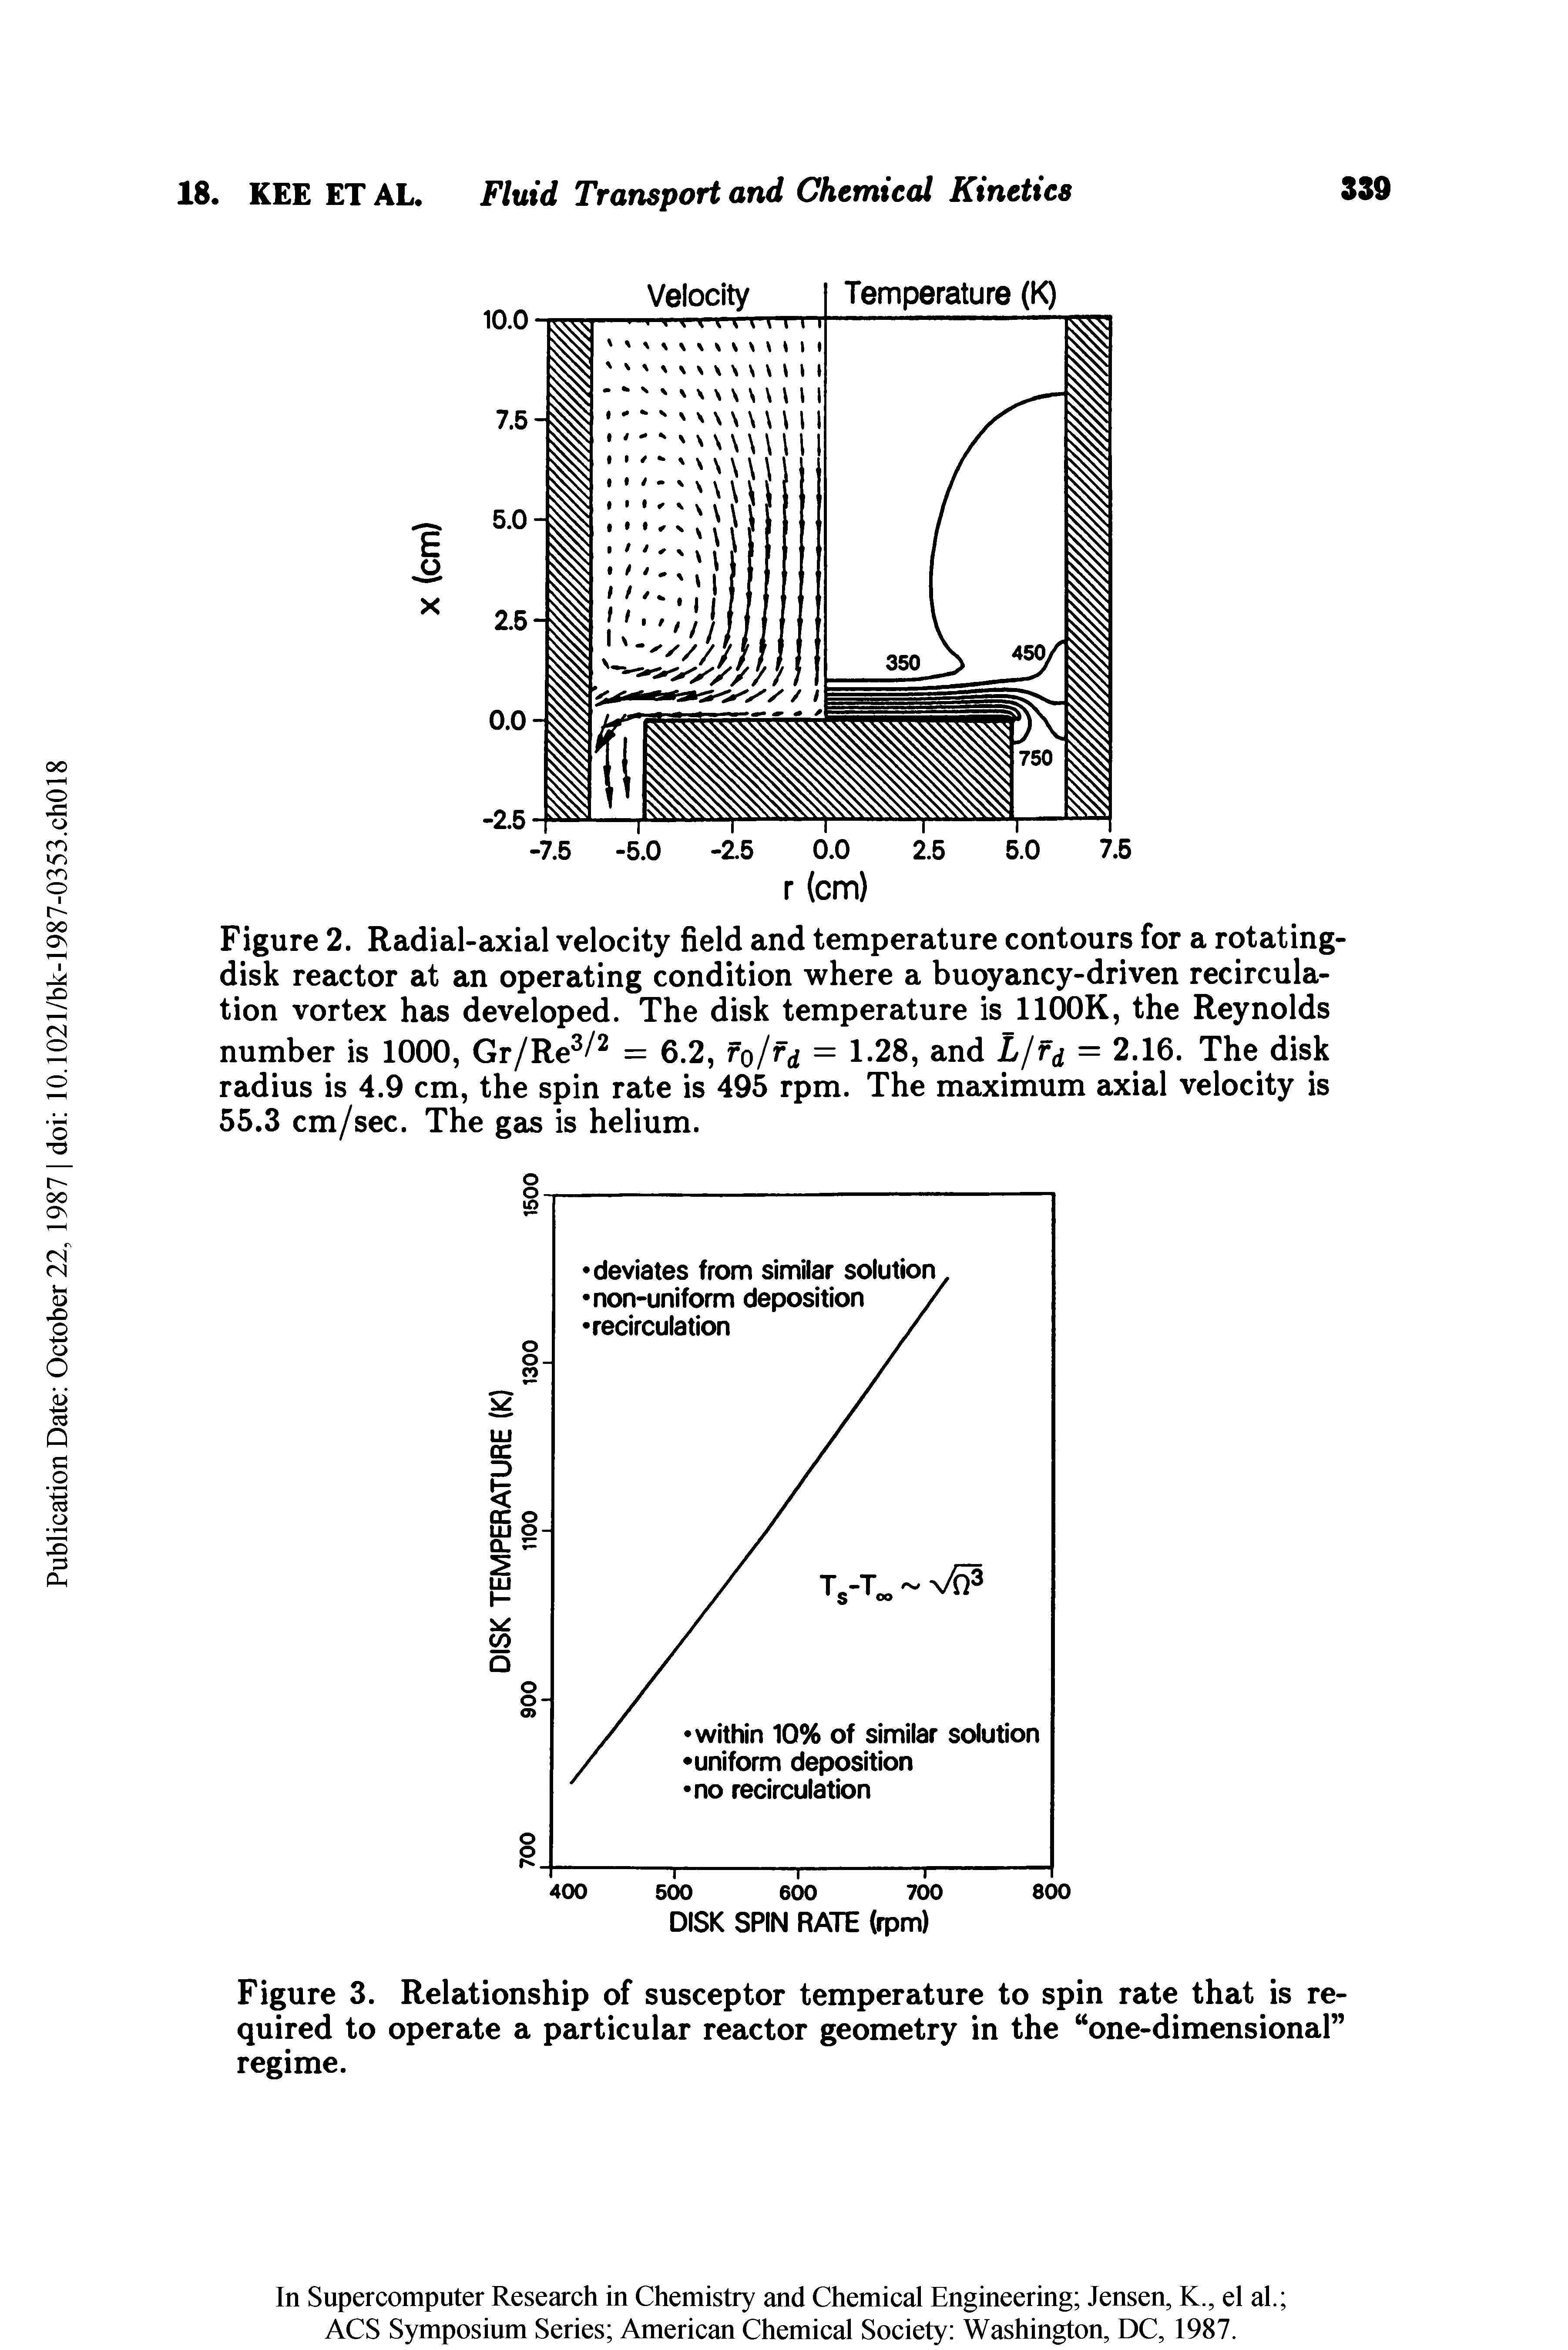 Figure 2. Radial-axial velocity field and temperature contours for a rotating-disk reactor at an operating condition where a buoyancy-driven recirculation vortex has developed. The disk temperature is HOOK, the Reynolds number is 1000, Gr/Re / = 6.2, fo/f = 1.28, and L/f = 2.16. The disk radius is 4.9 cm, the spin rate is 495 rpm. The maximum axial velocity is 55.3 cm/sec. The gas is helium.